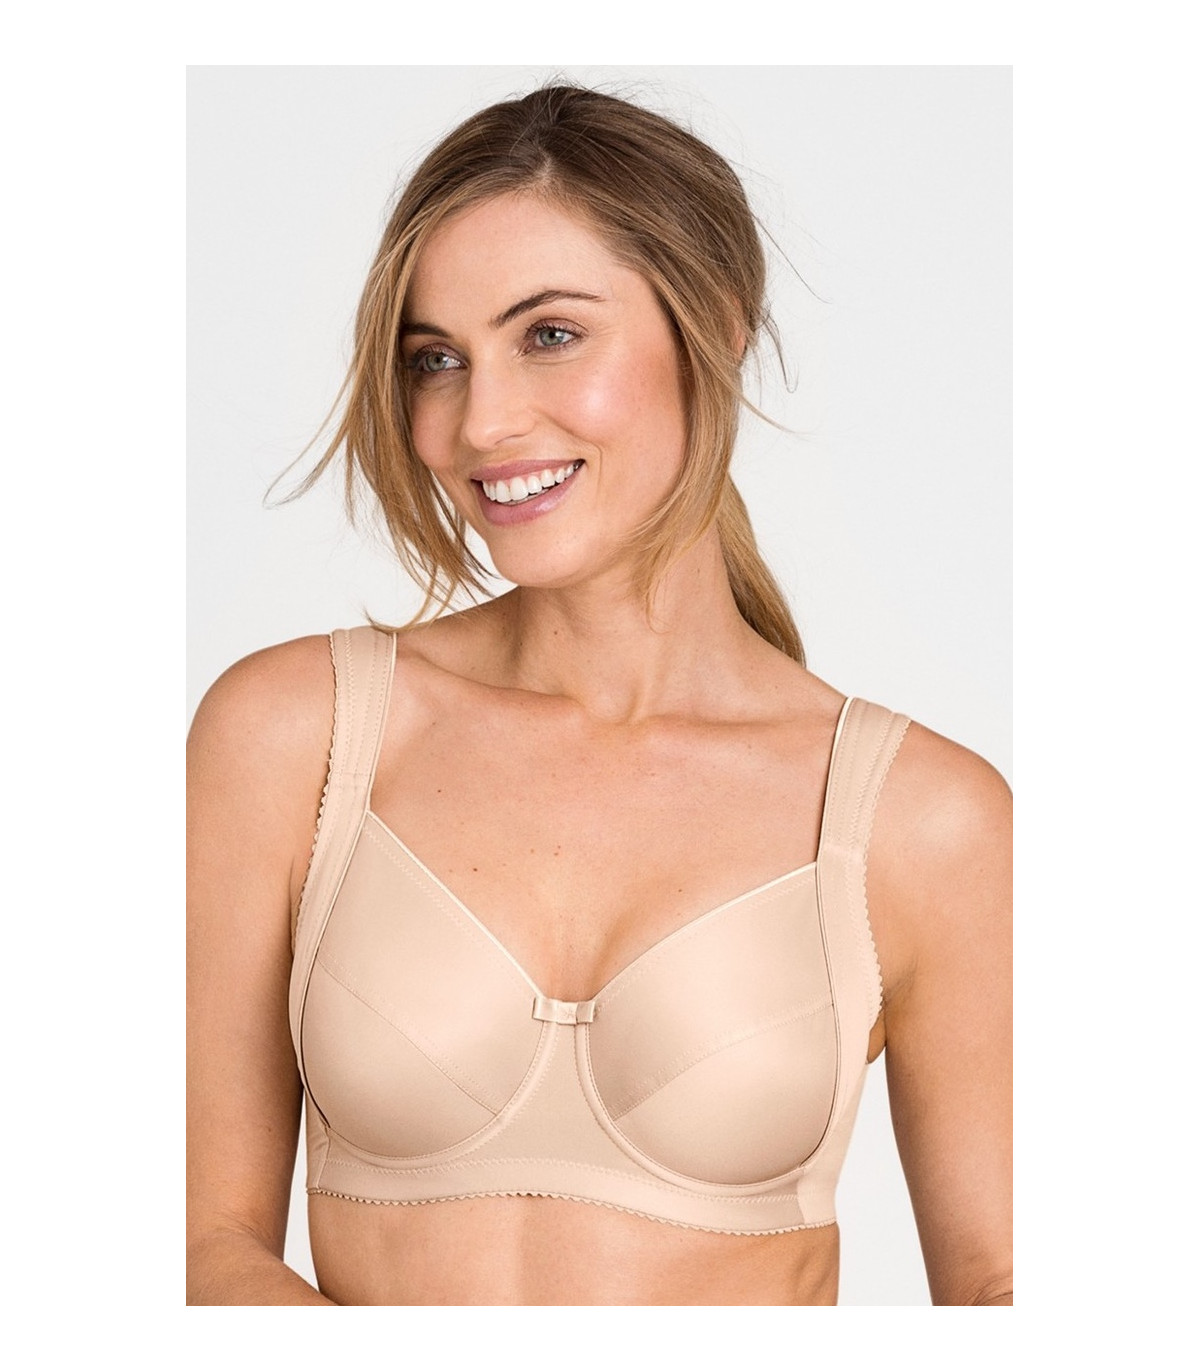 LAST DAY 80% OFF 🎁, 💖Meet Embraced, the perfect bra for your golden  years 👸 Let us return your breasts to their glory days! GET 80% OFF👉  invilift.us/embraced2